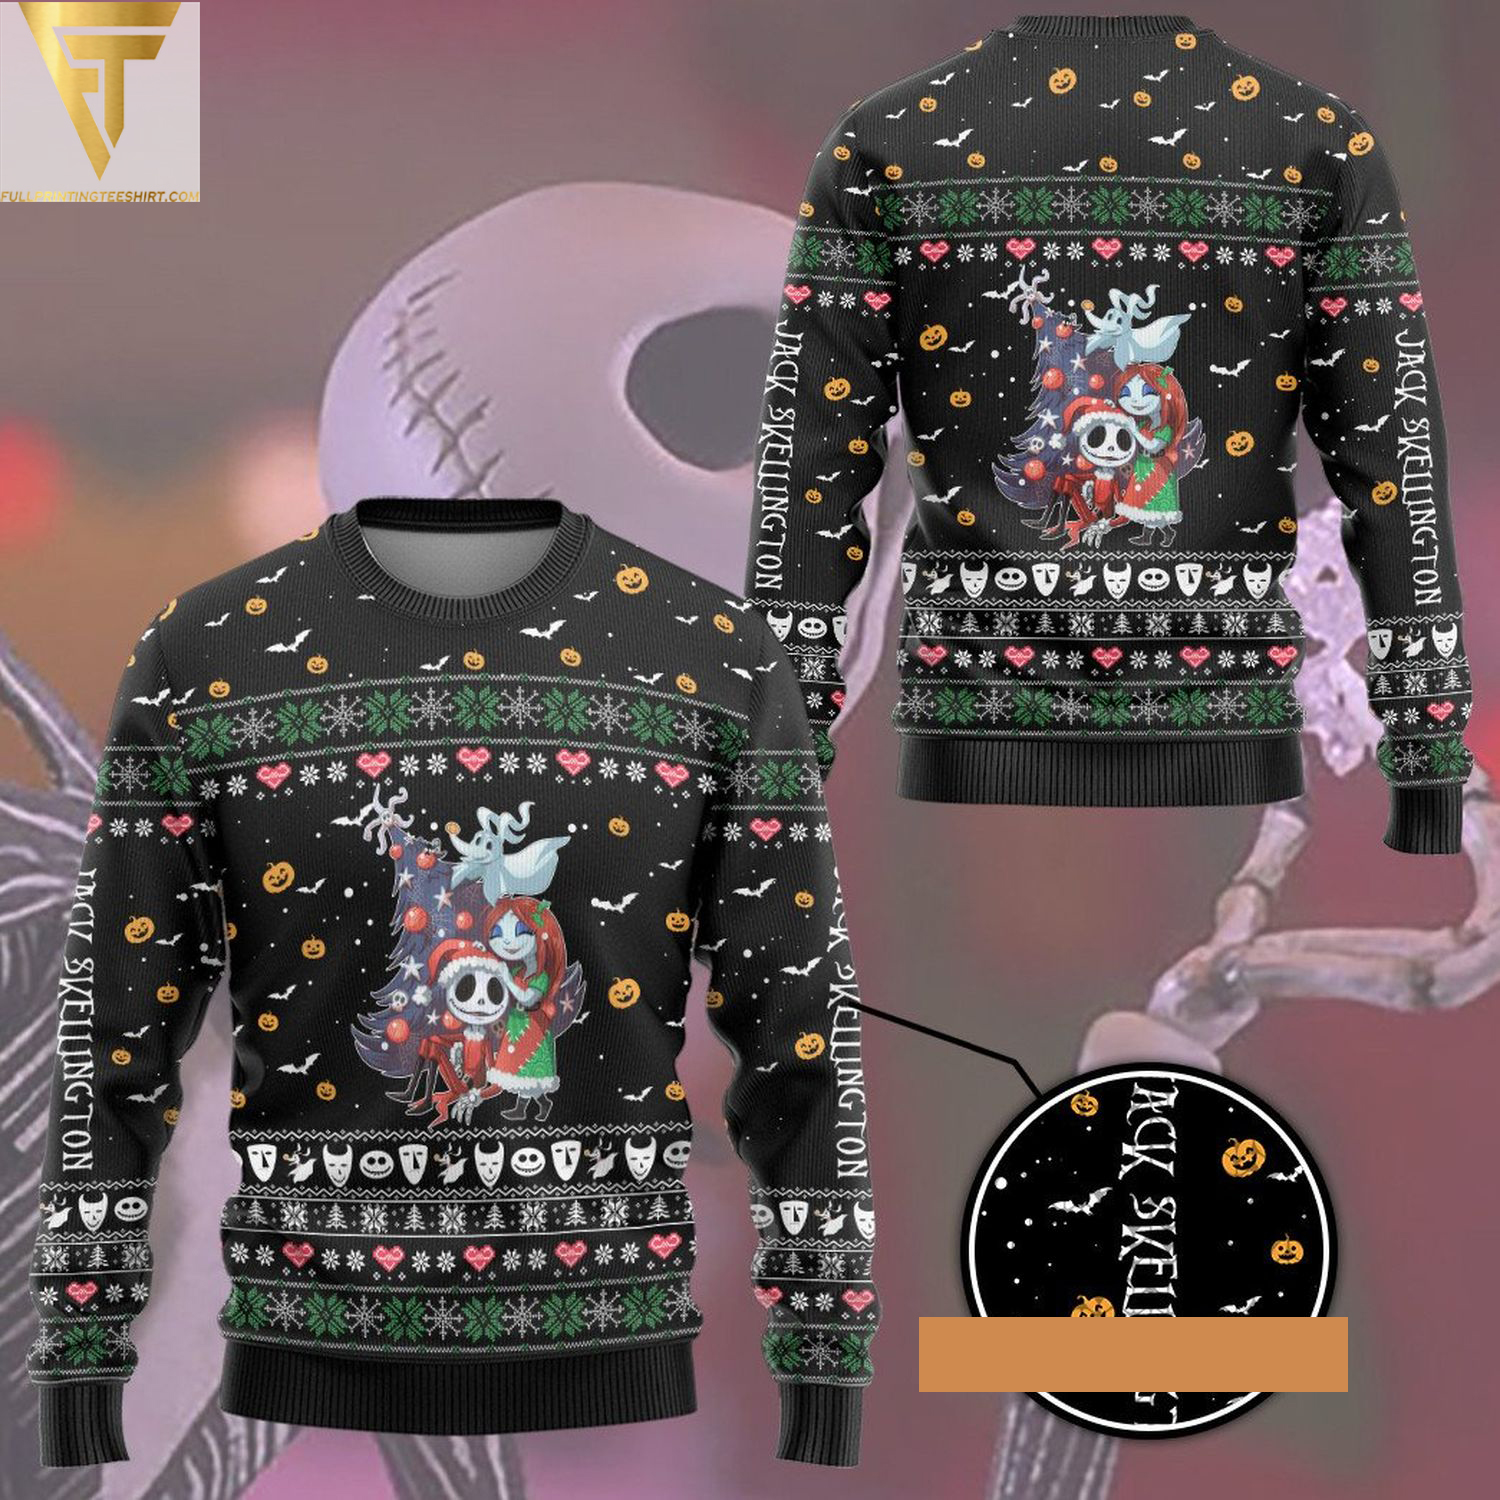 The nightmare before christmas jack and sally ugly christmas sweater - Copy (2)